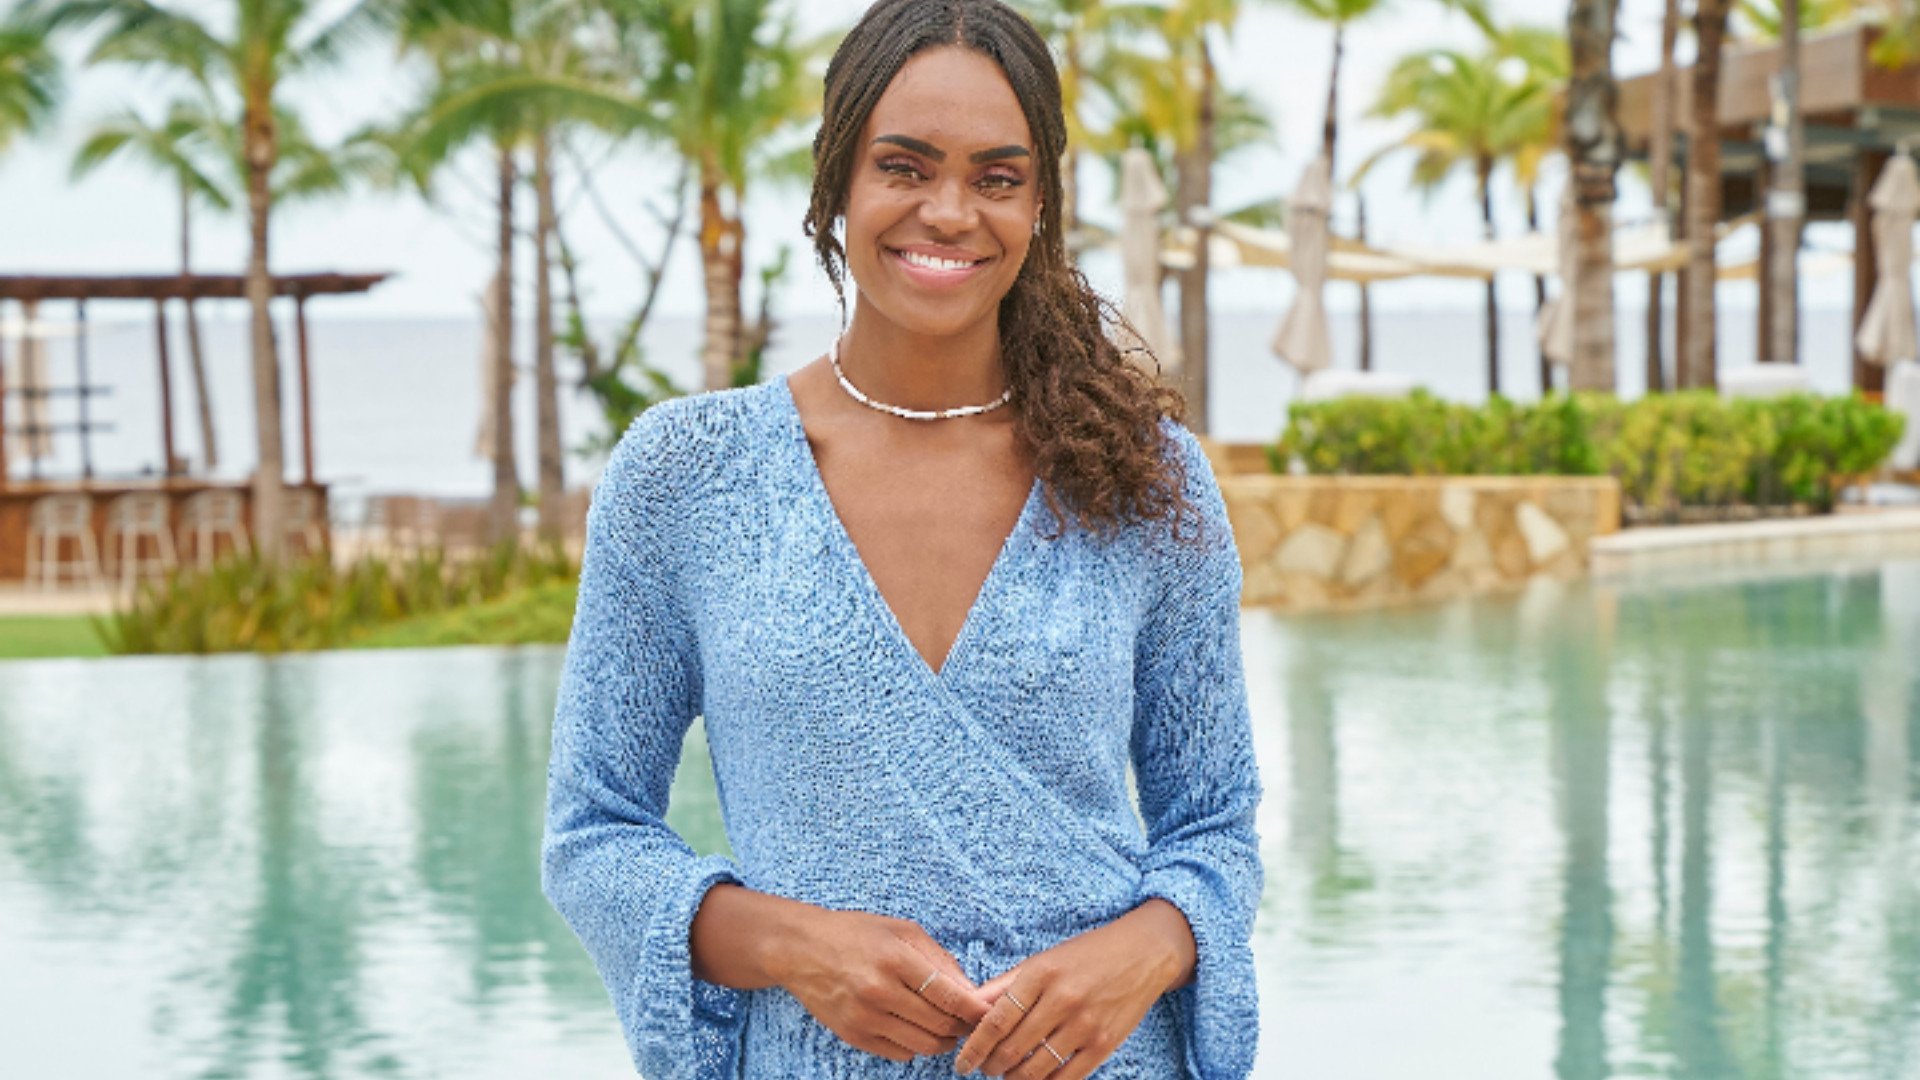 Michelle Young poses in ‘The Bachelorette’ Season 18 finale in 2021